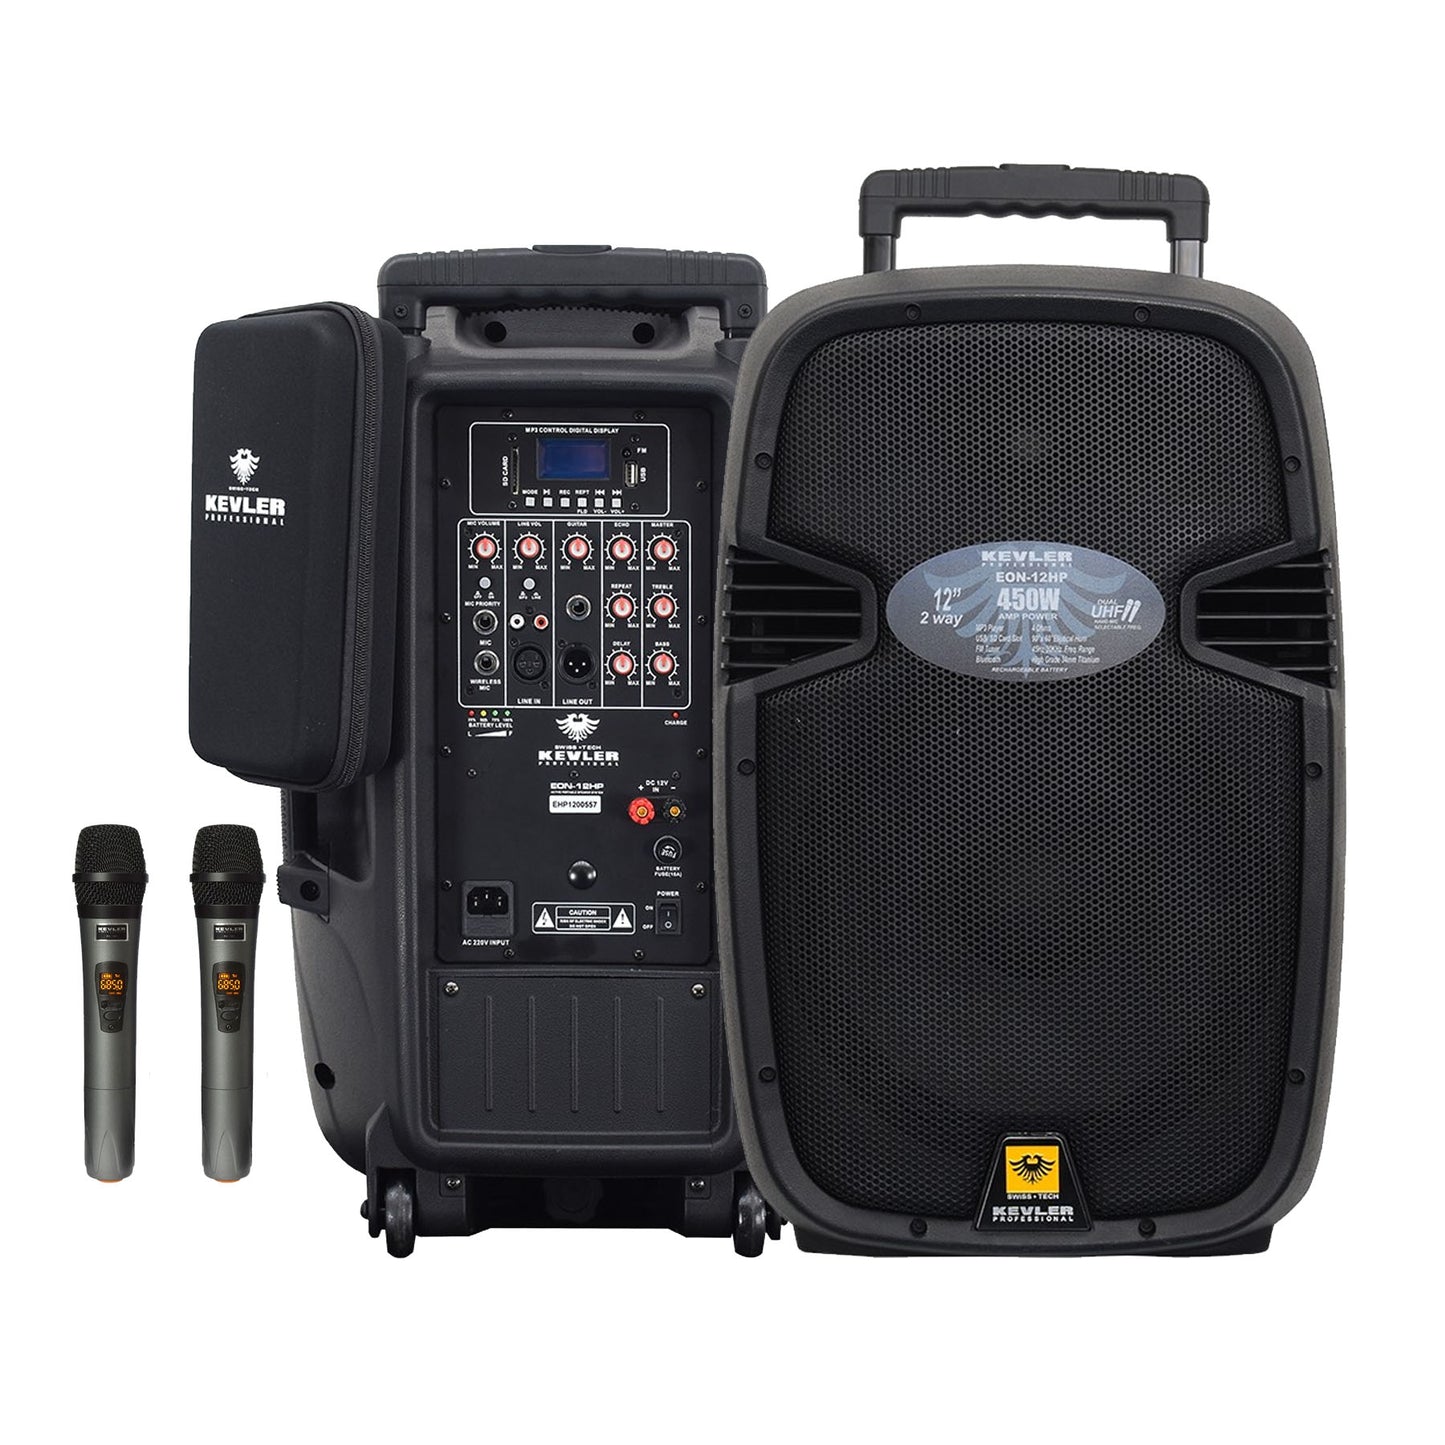 KEVLER EON-12HP 12" 450W 2-Way Full Range Active Loud Speaker with LCD Display and Class D Amplifier, USB Port/Bluetooth/FM Function, Mic Line, RCA and XLR I/O and 2 Wireless Microphones with Rechargeable Battery